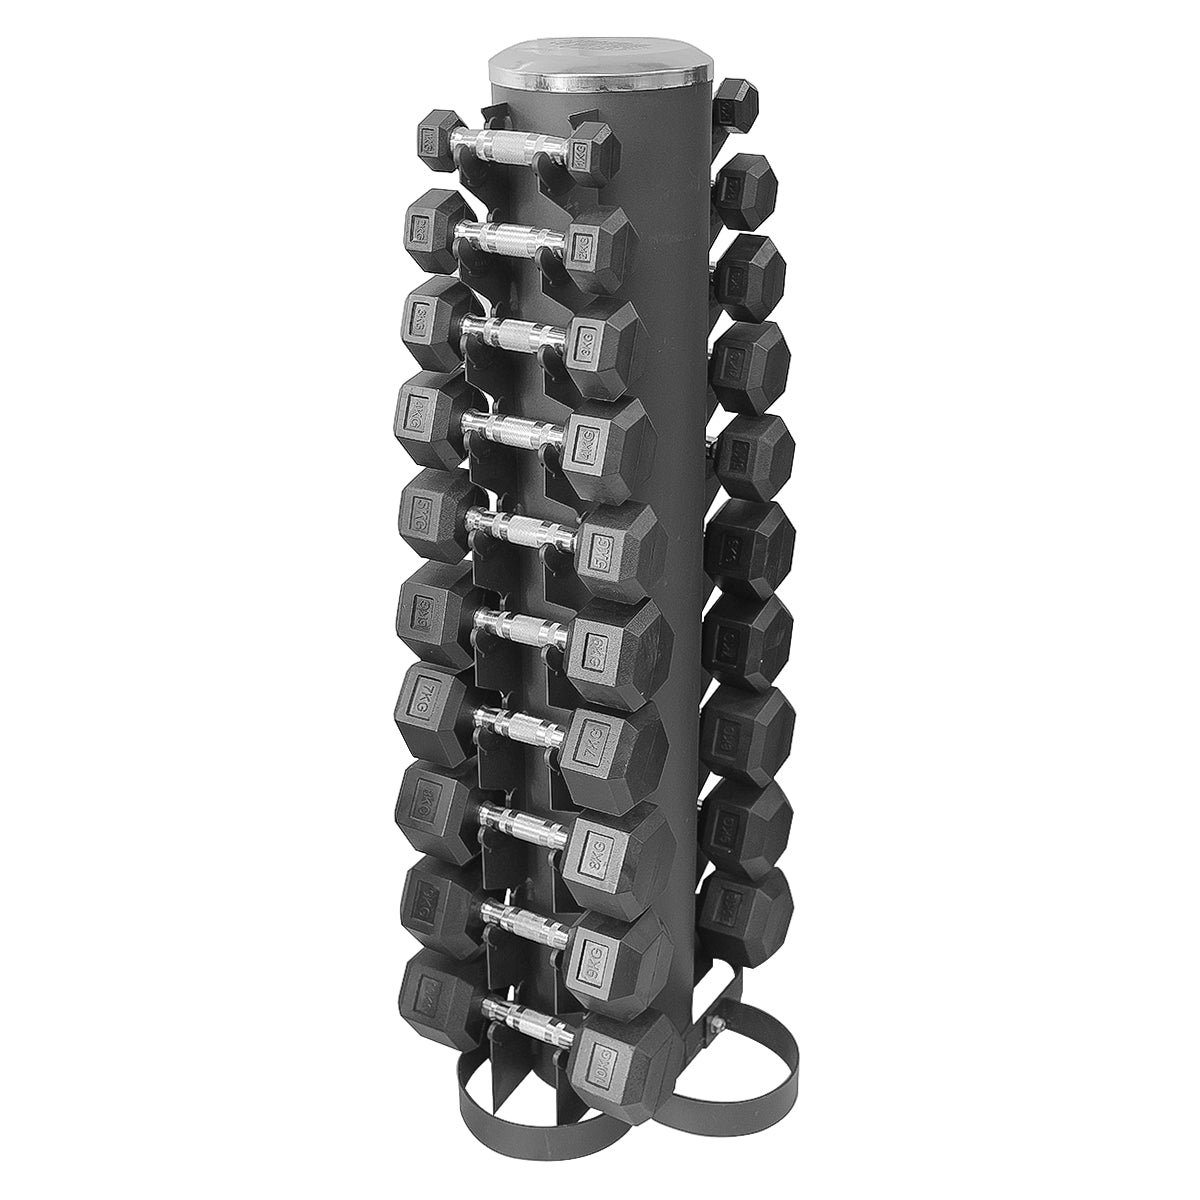 1kg to 10kg Hex Dumbbell Set with stand